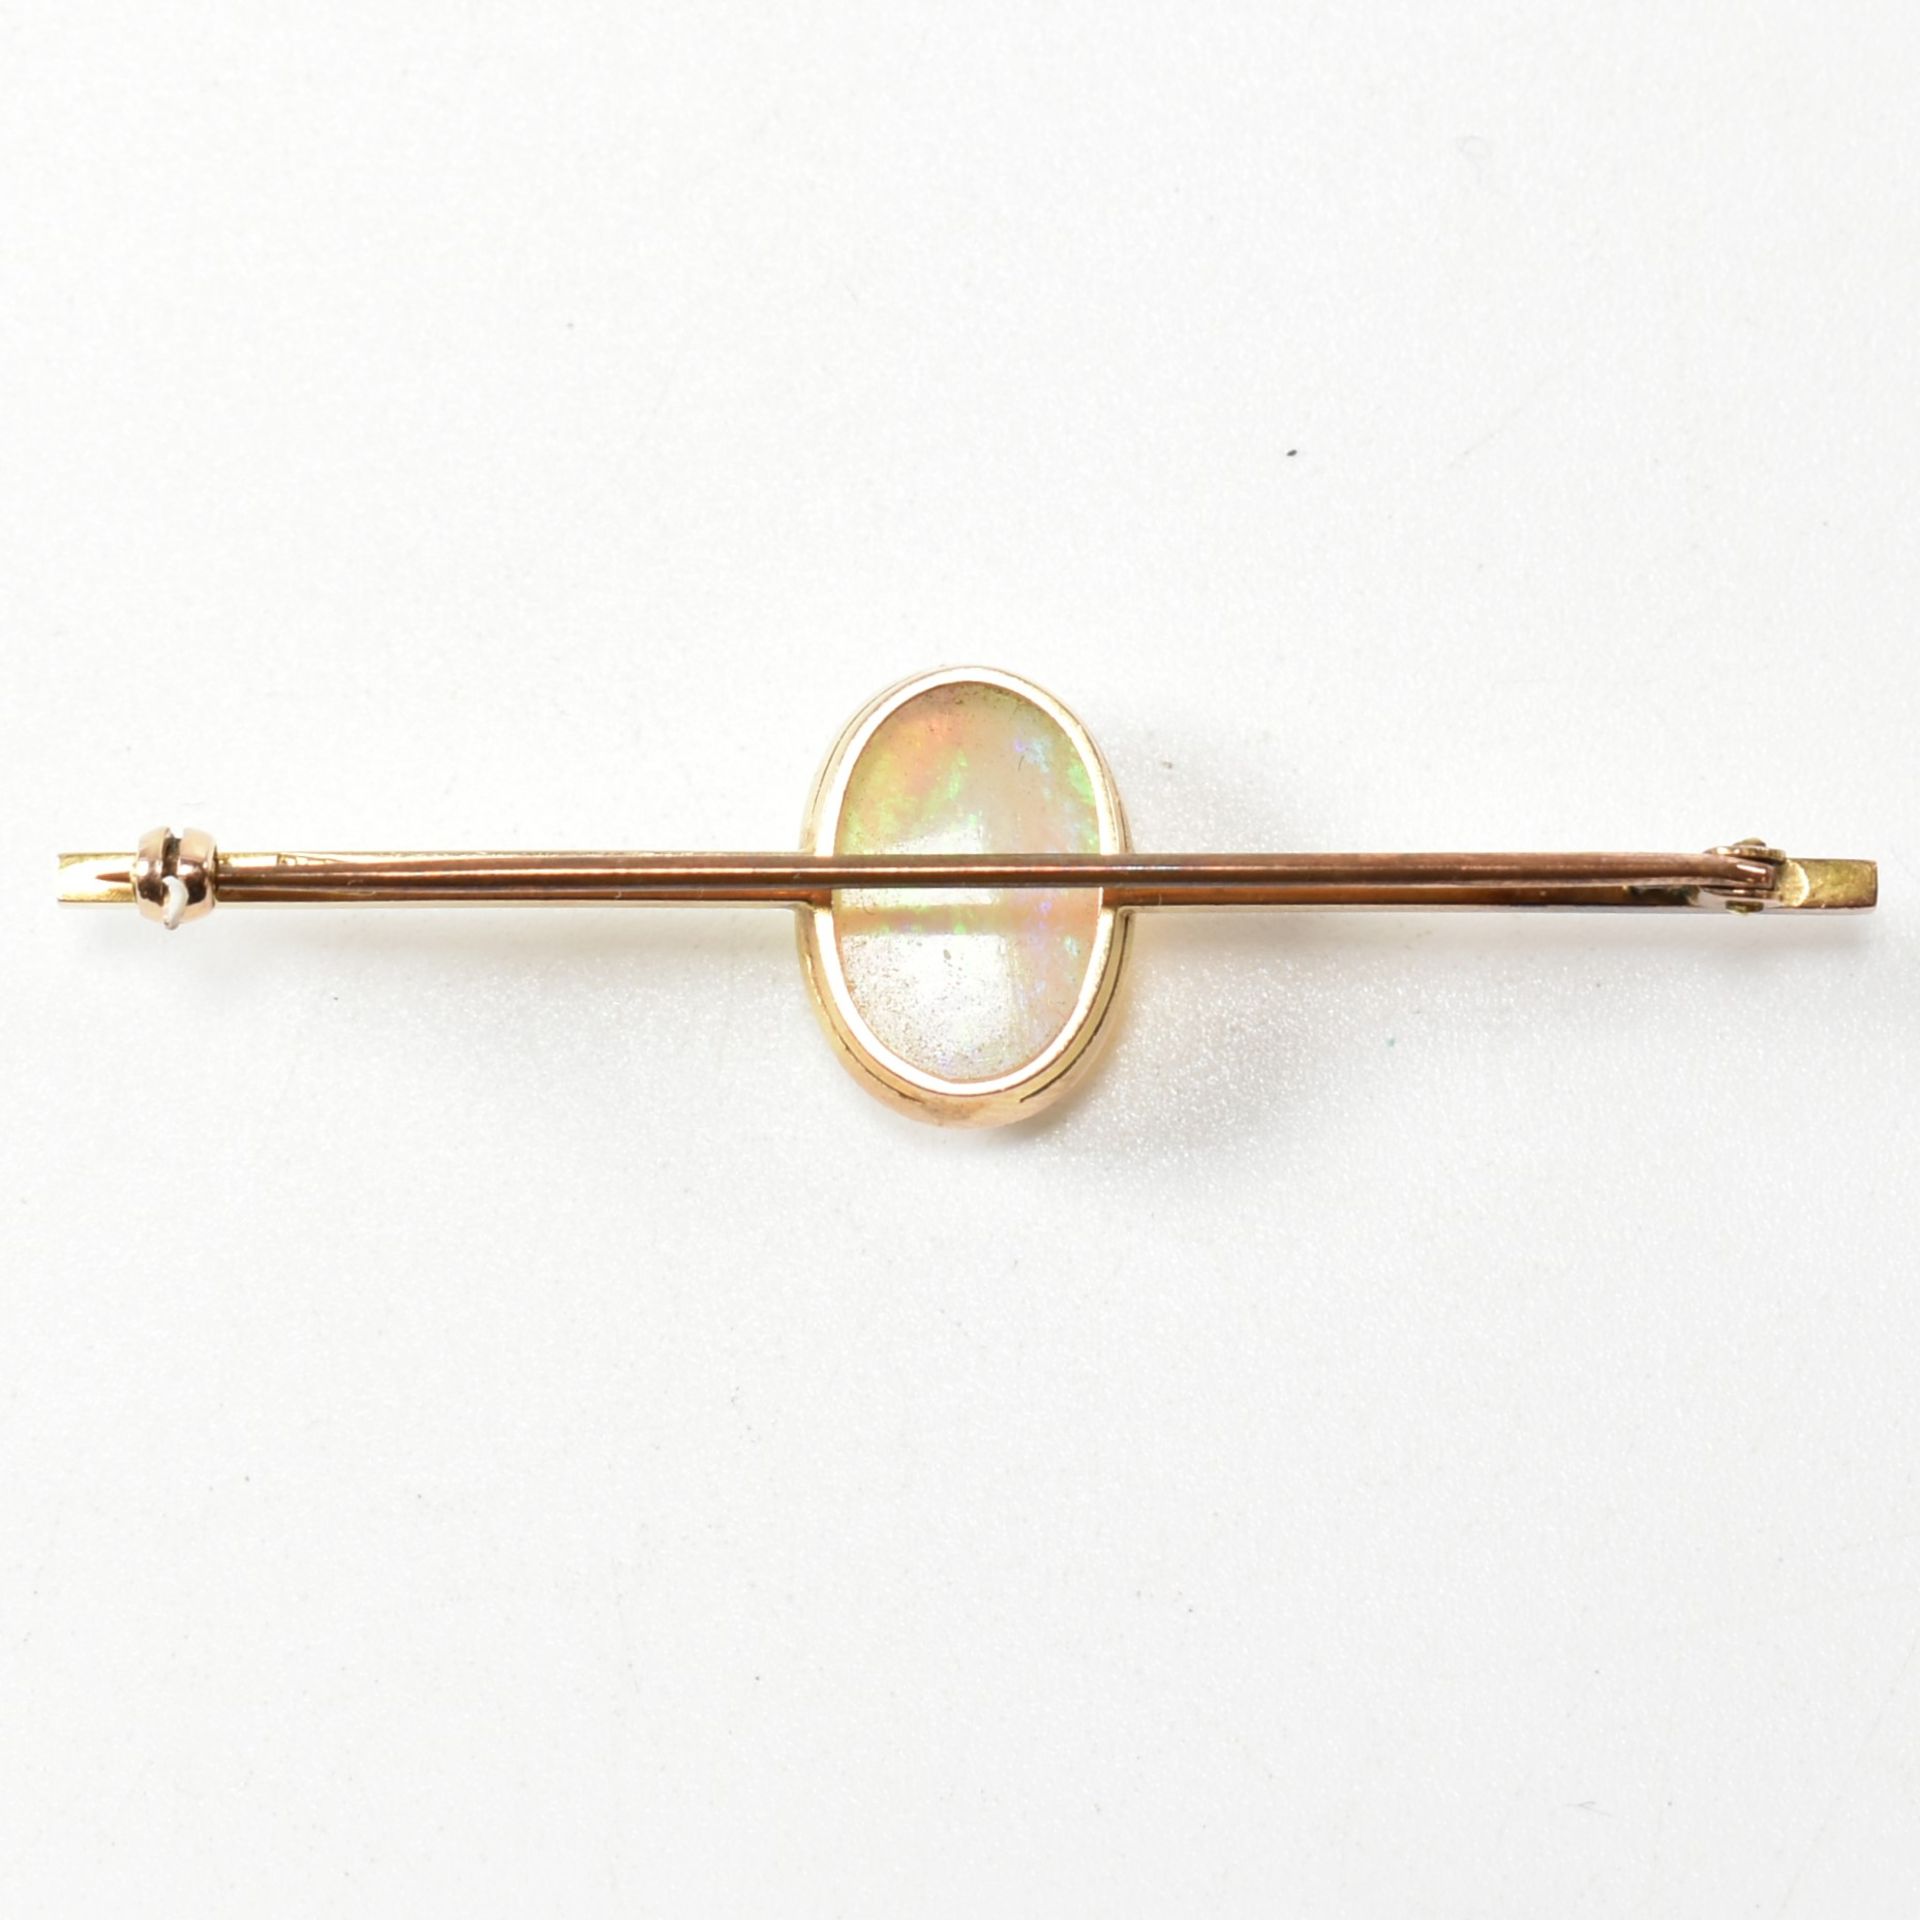 EARLY 20TH CENTURY 15CT GOLD & OPAL BAR BROOCH PIN - Image 2 of 5